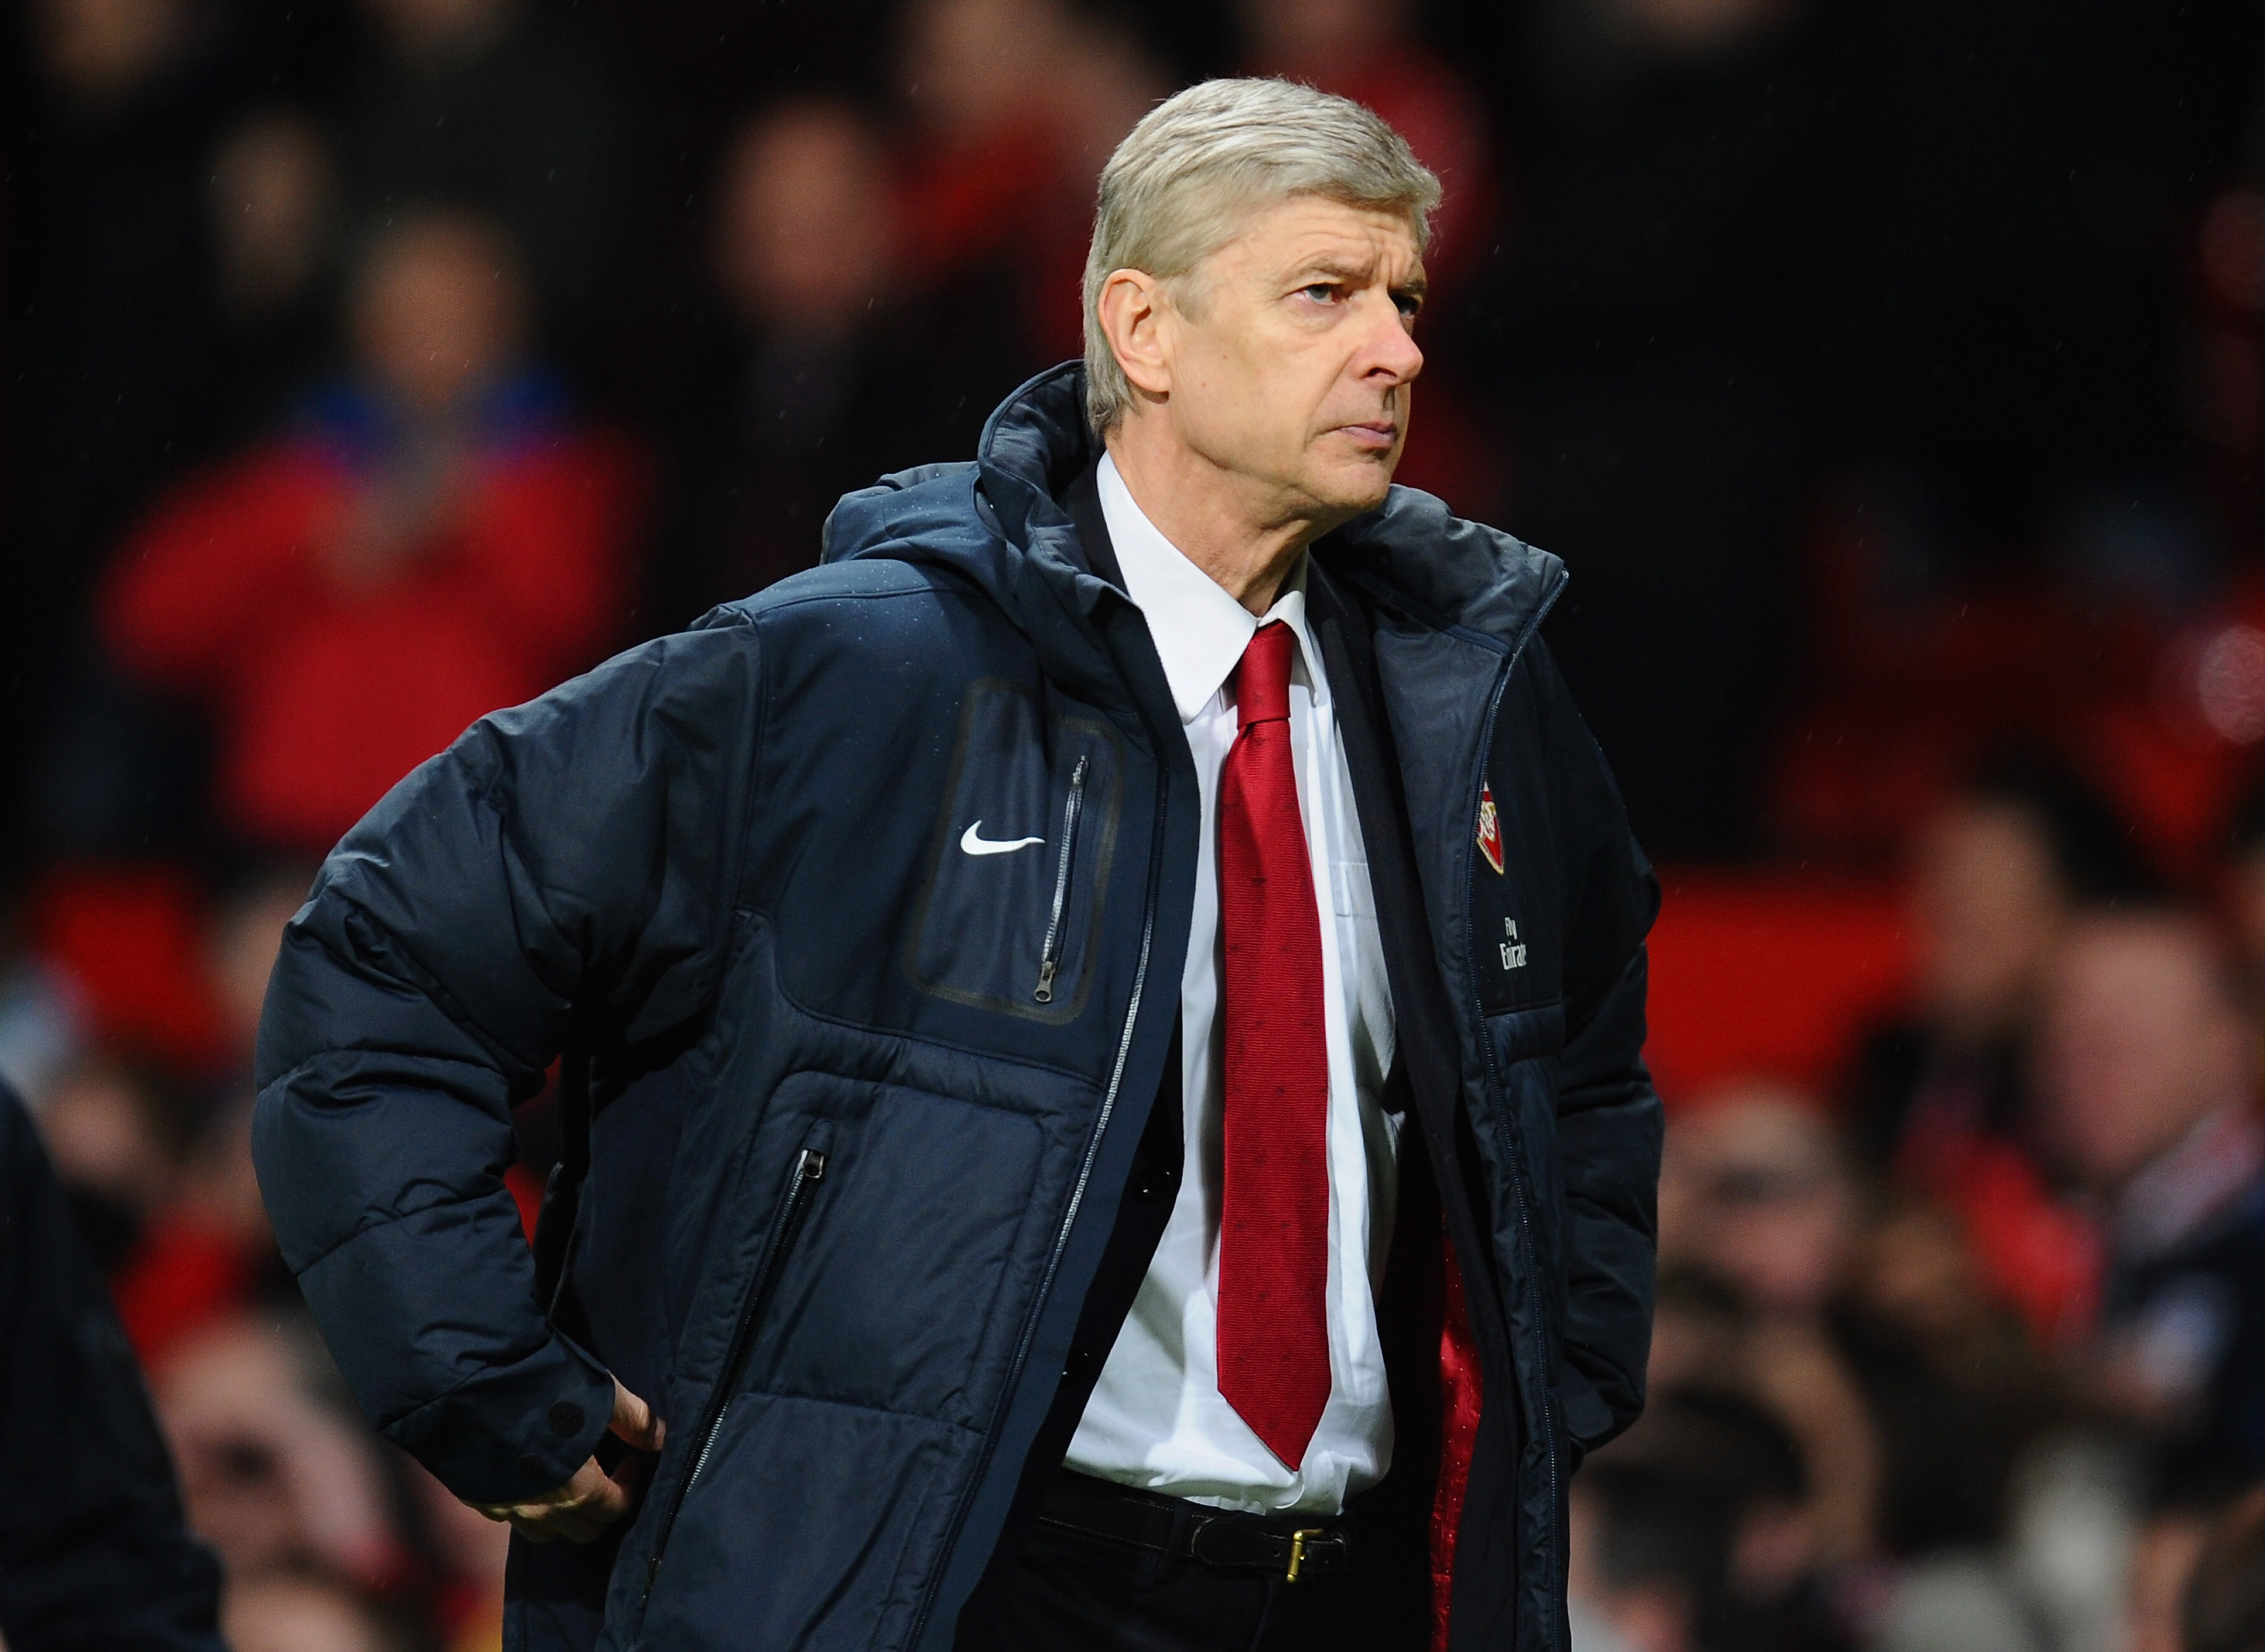 MANCHESTER, ENGLAND - MARCH 12:  Arsenal manager Arsene Wenger looks dejected after defeat in the FA Cup sponsored by E.On Sixth Round match between Manchester United and Arsenal at Old Trafford on March 12, 2011 in Manchester, England.  (Photo by Clive M